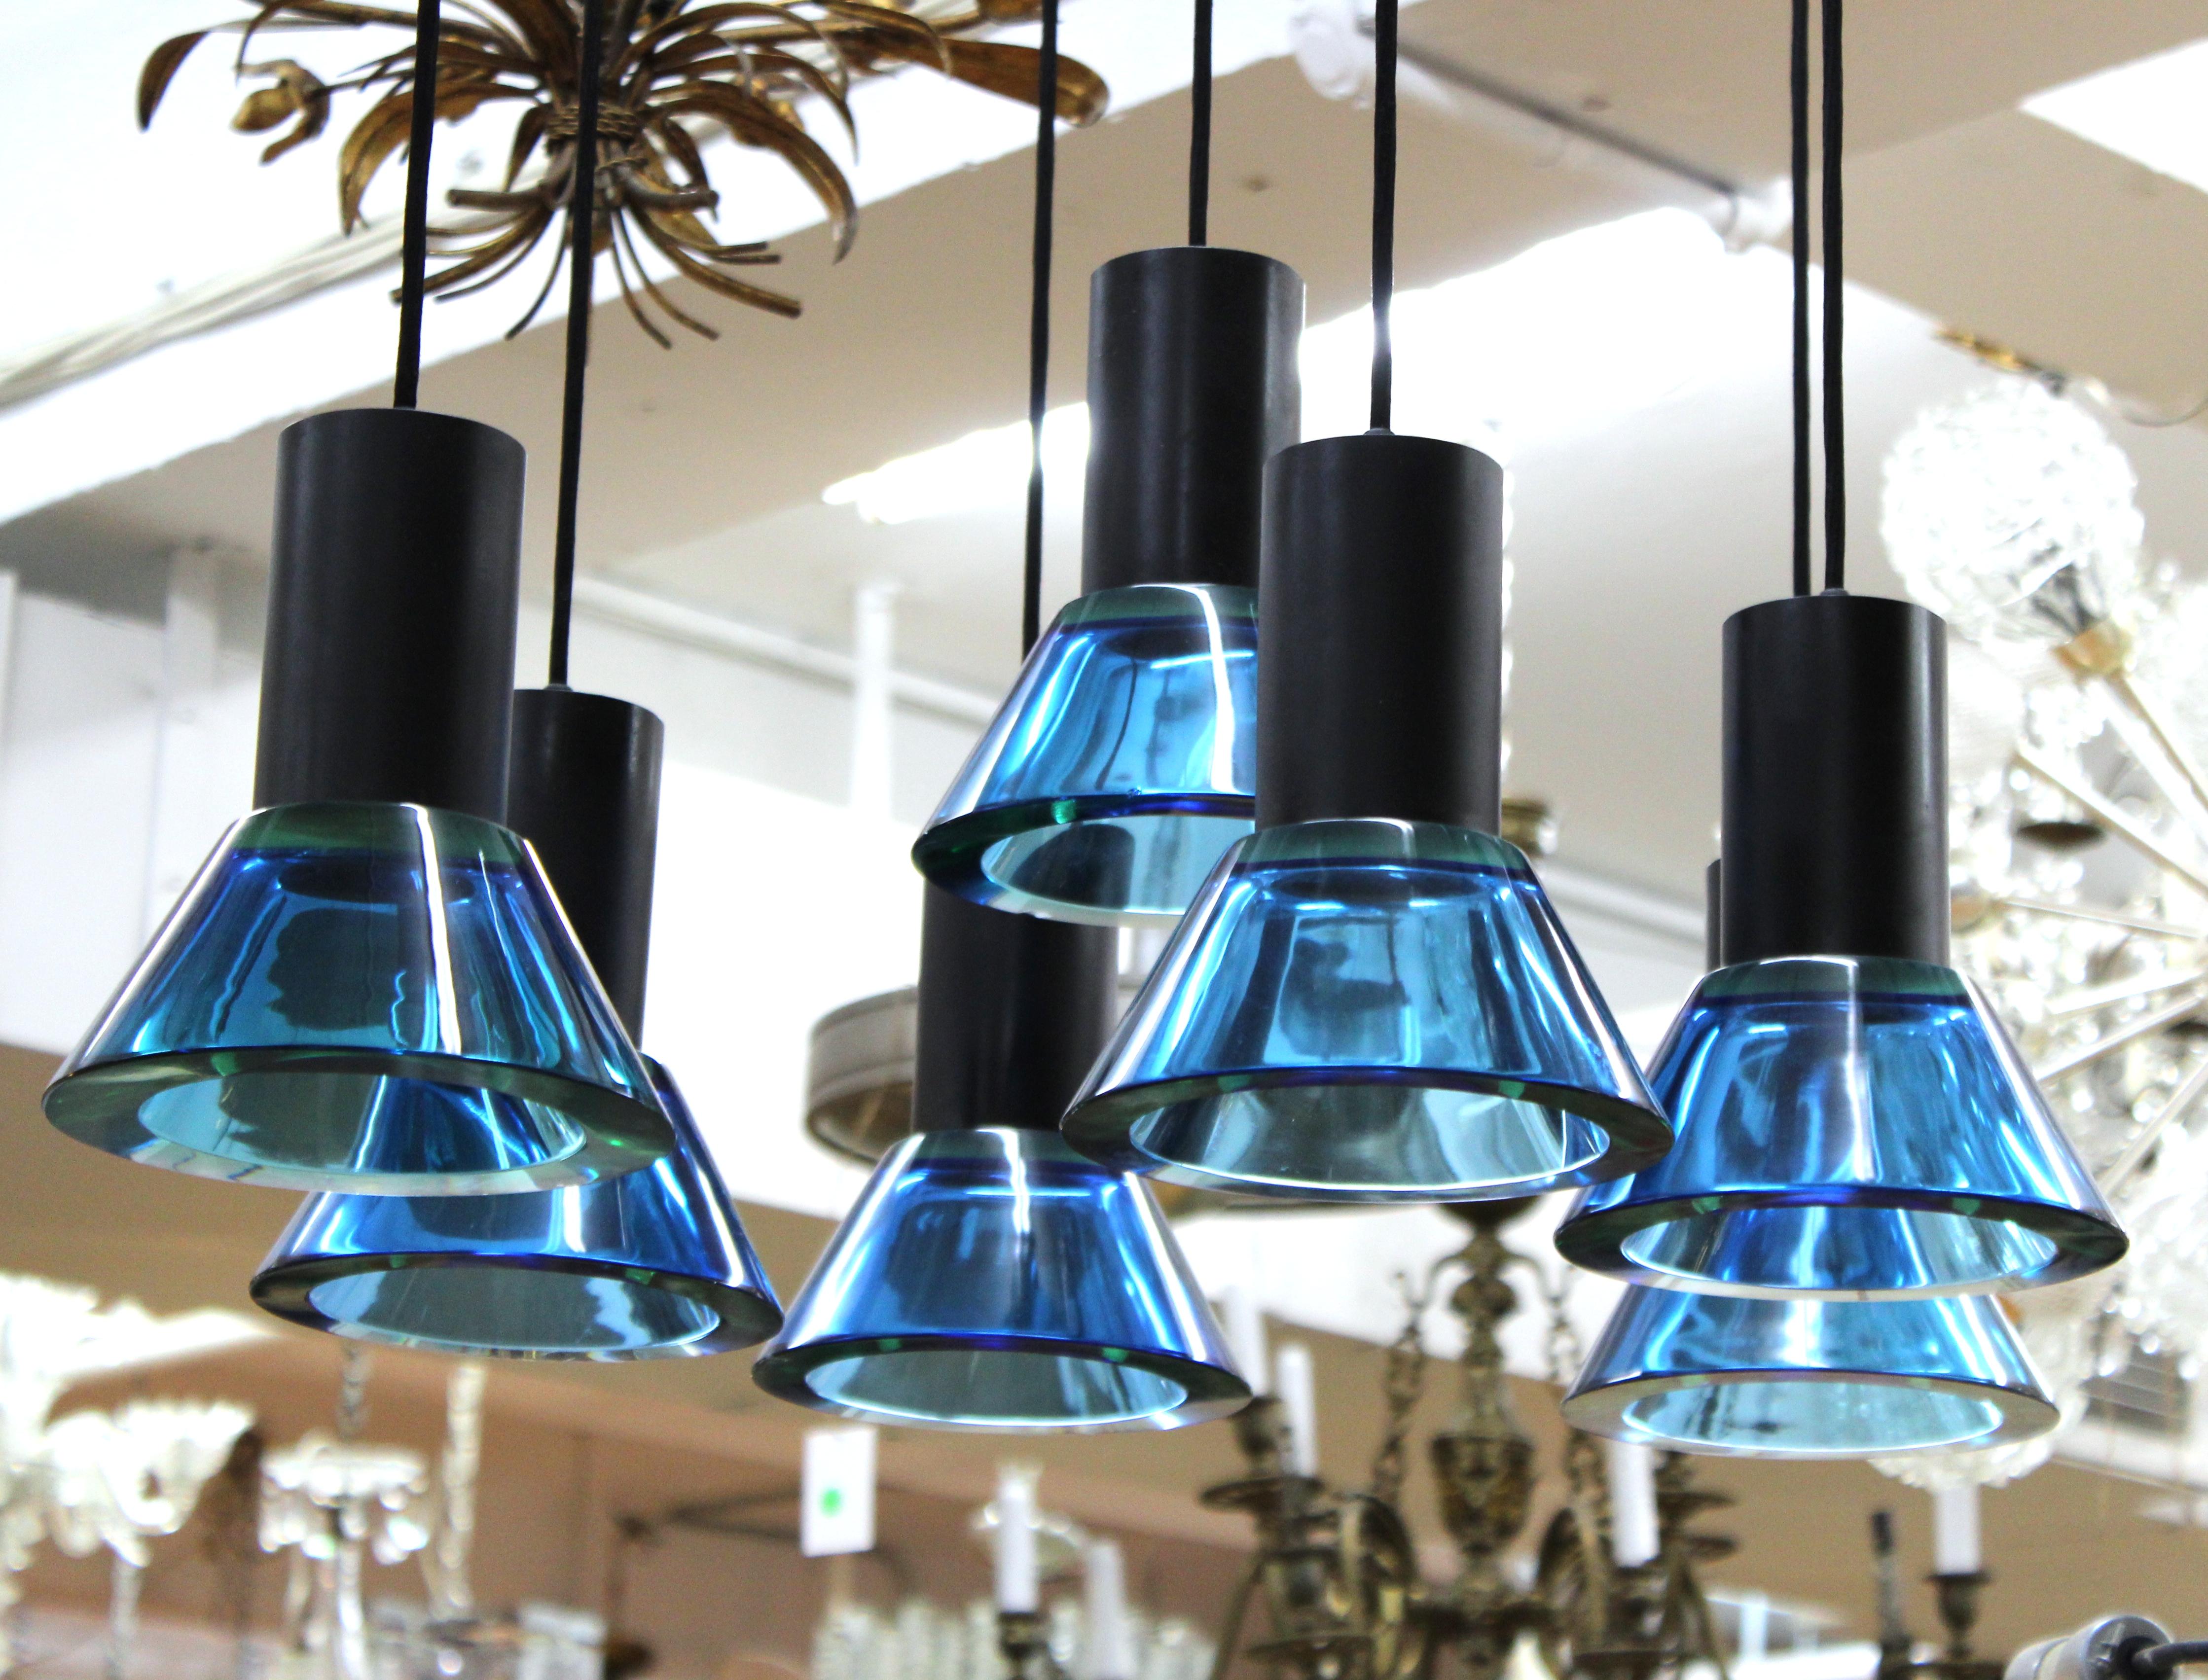 Italian Modern glass pendant chandelier designed by Gino Sarfatti and Archimede Seguso. The piece has seven pendant glass shades in heavy blue glass hanging from a metal frame. In great vintage condition with age-appropriate wear and use.